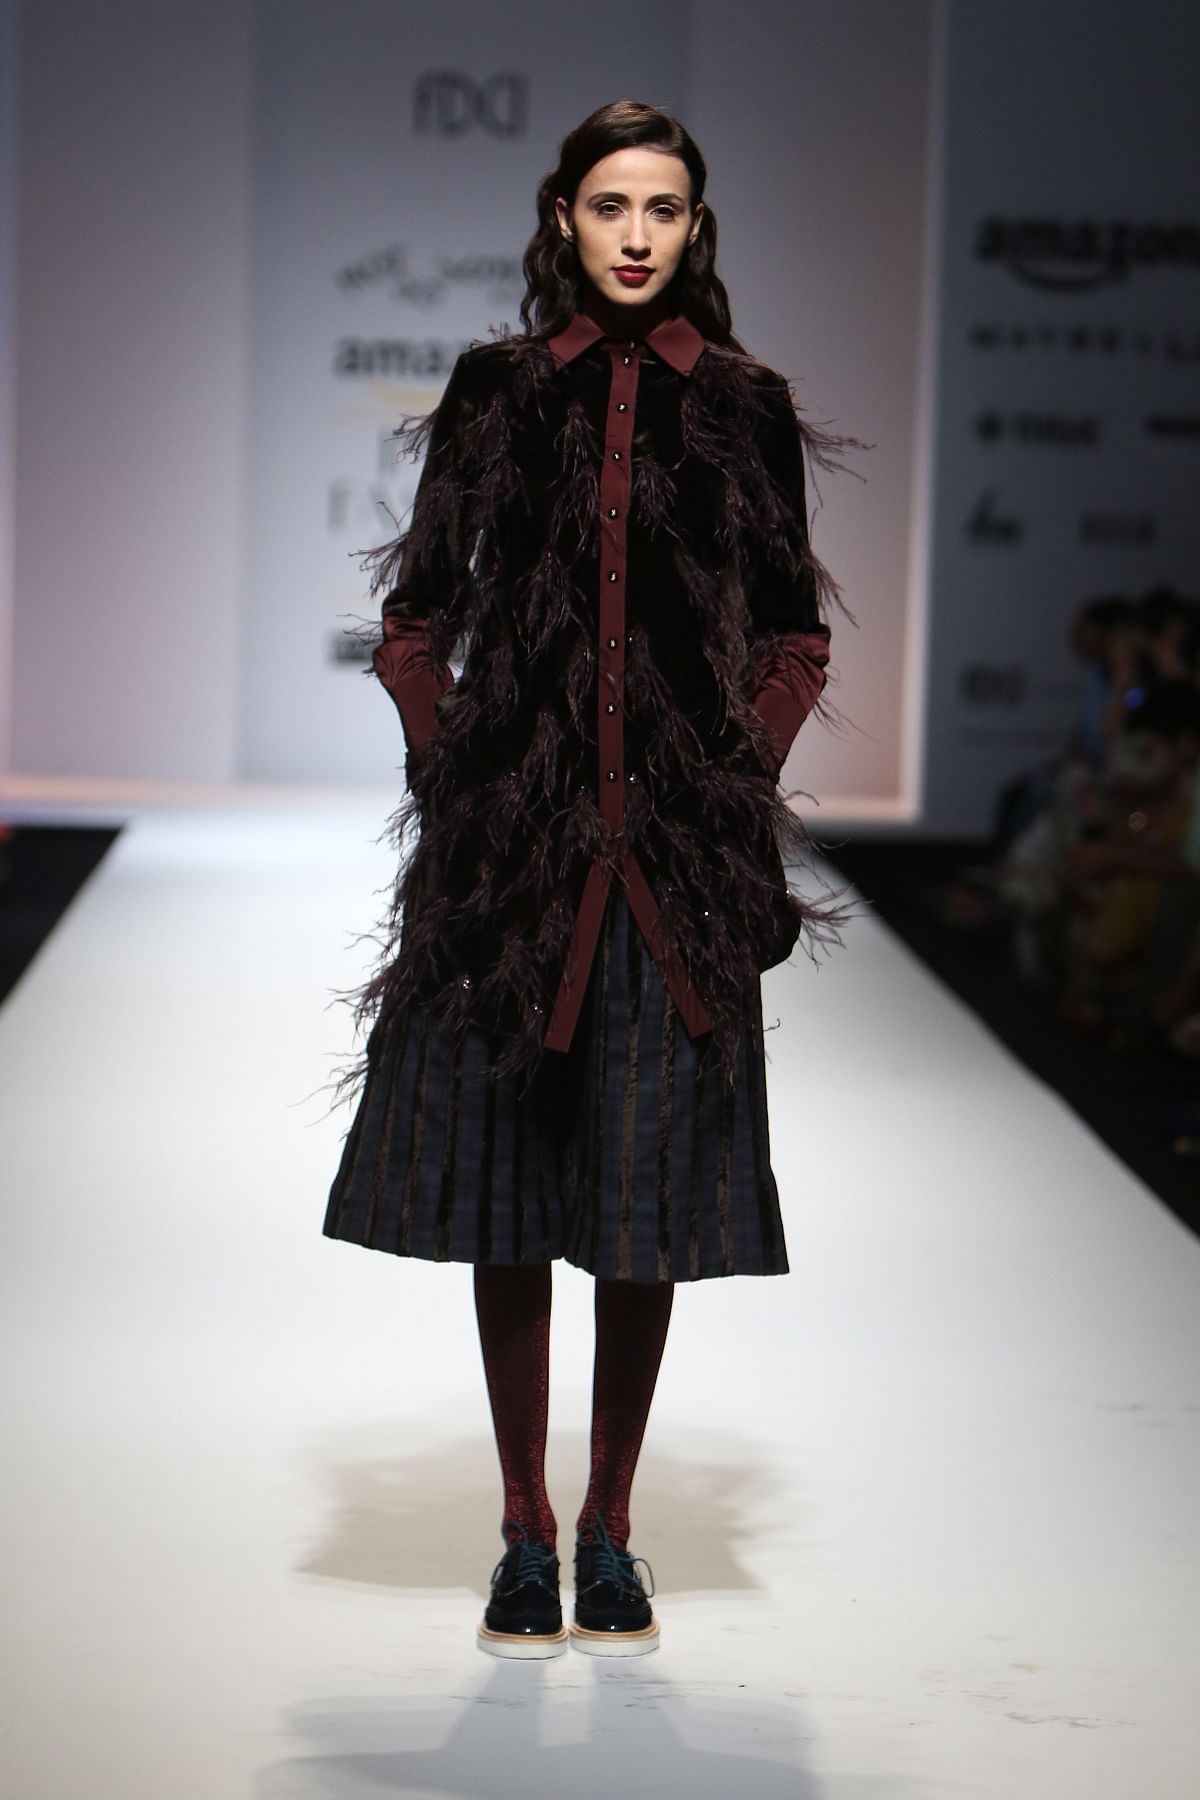 

We are curating the best pieces for you from Day 2 of the Amazon India Fashion Week.